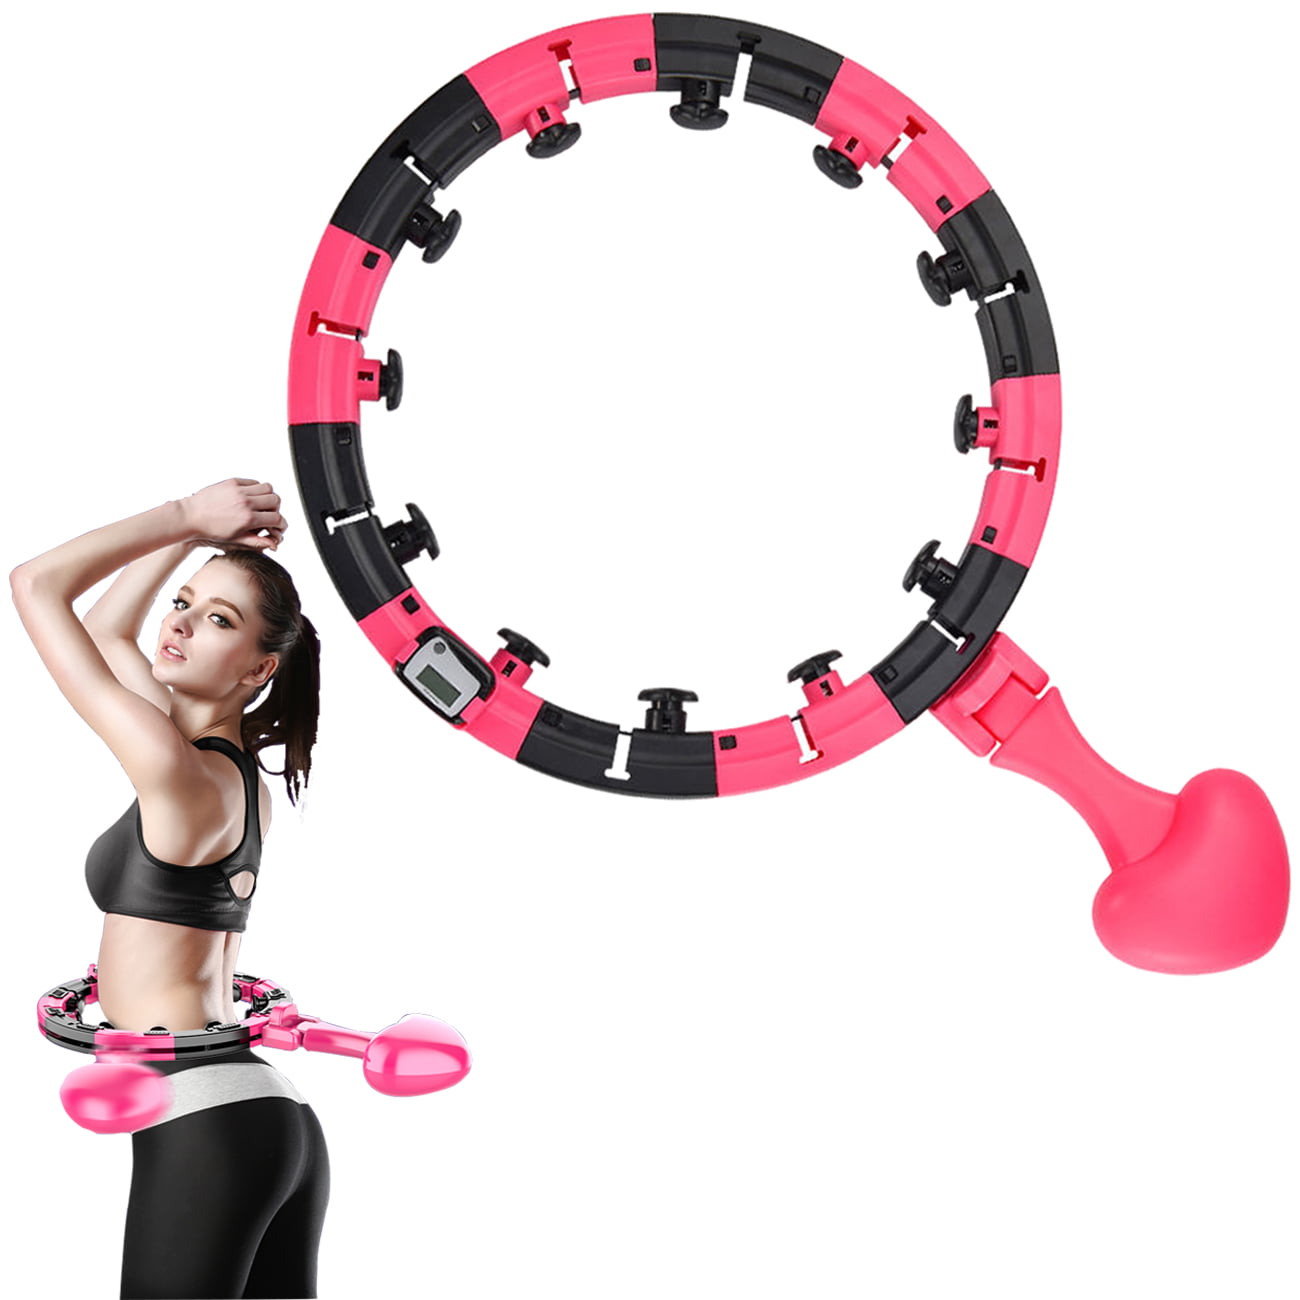 Weighted Hula Hoops For Adults Weight Loss Plus Size Weight Adjustable Hula Hoop Women 